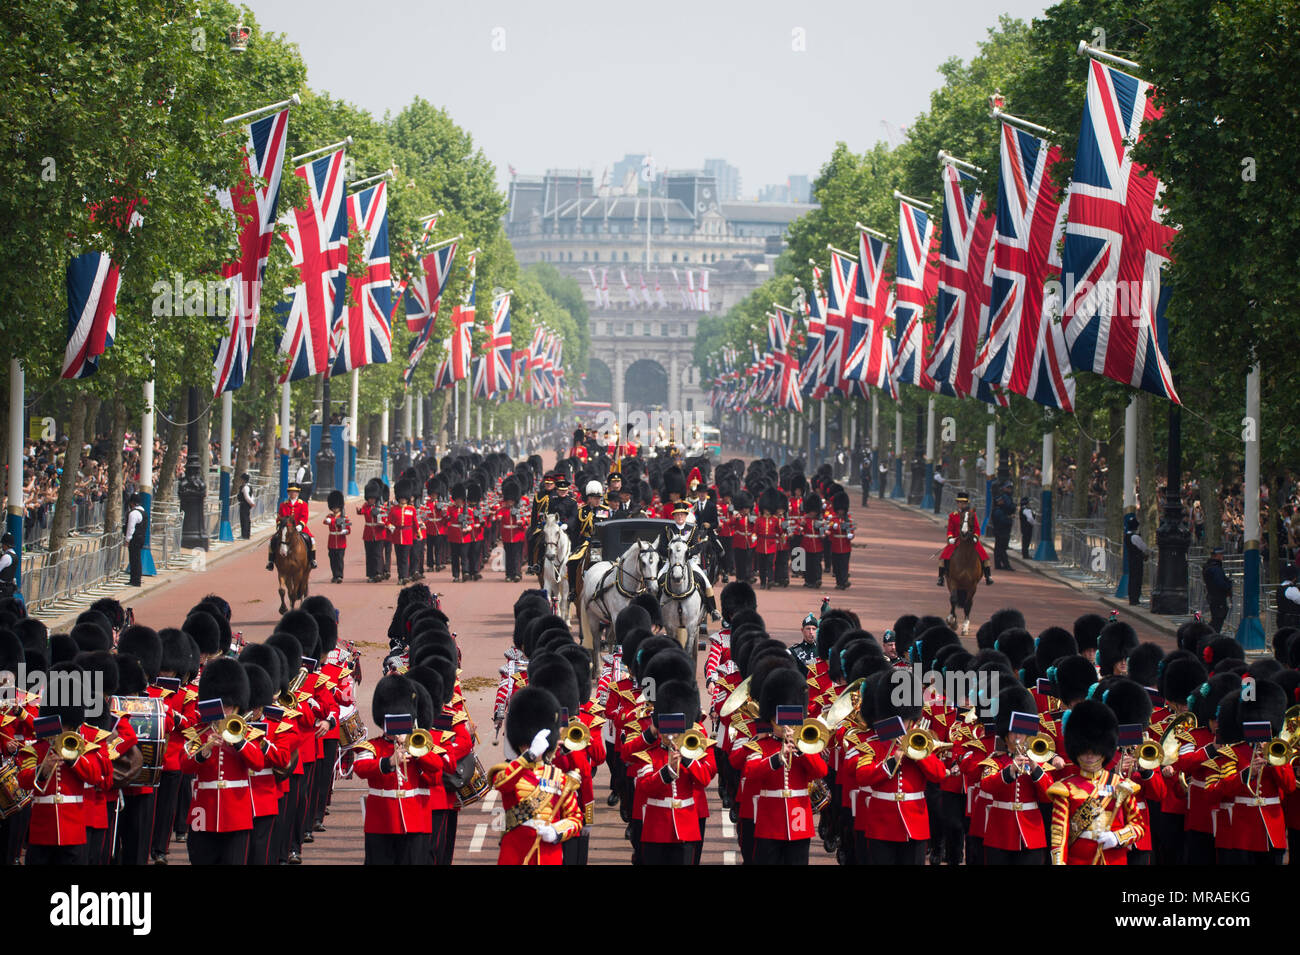 The Mall, London, UK. 26 May, 2018. Major General’s Review is held in sweltering heat, the penultimate rehearsal for the Queen’s Birthday Parade, also known as Trooping the Colour. 1400 soldiers from the Household Division and the King’s Troop Royal Horse Artillery take part in this full scale rehearsal. Frontal view from the Queen Victoria Memorial. Credit: Malcolm Park/Alamy Live News. Stock Photo